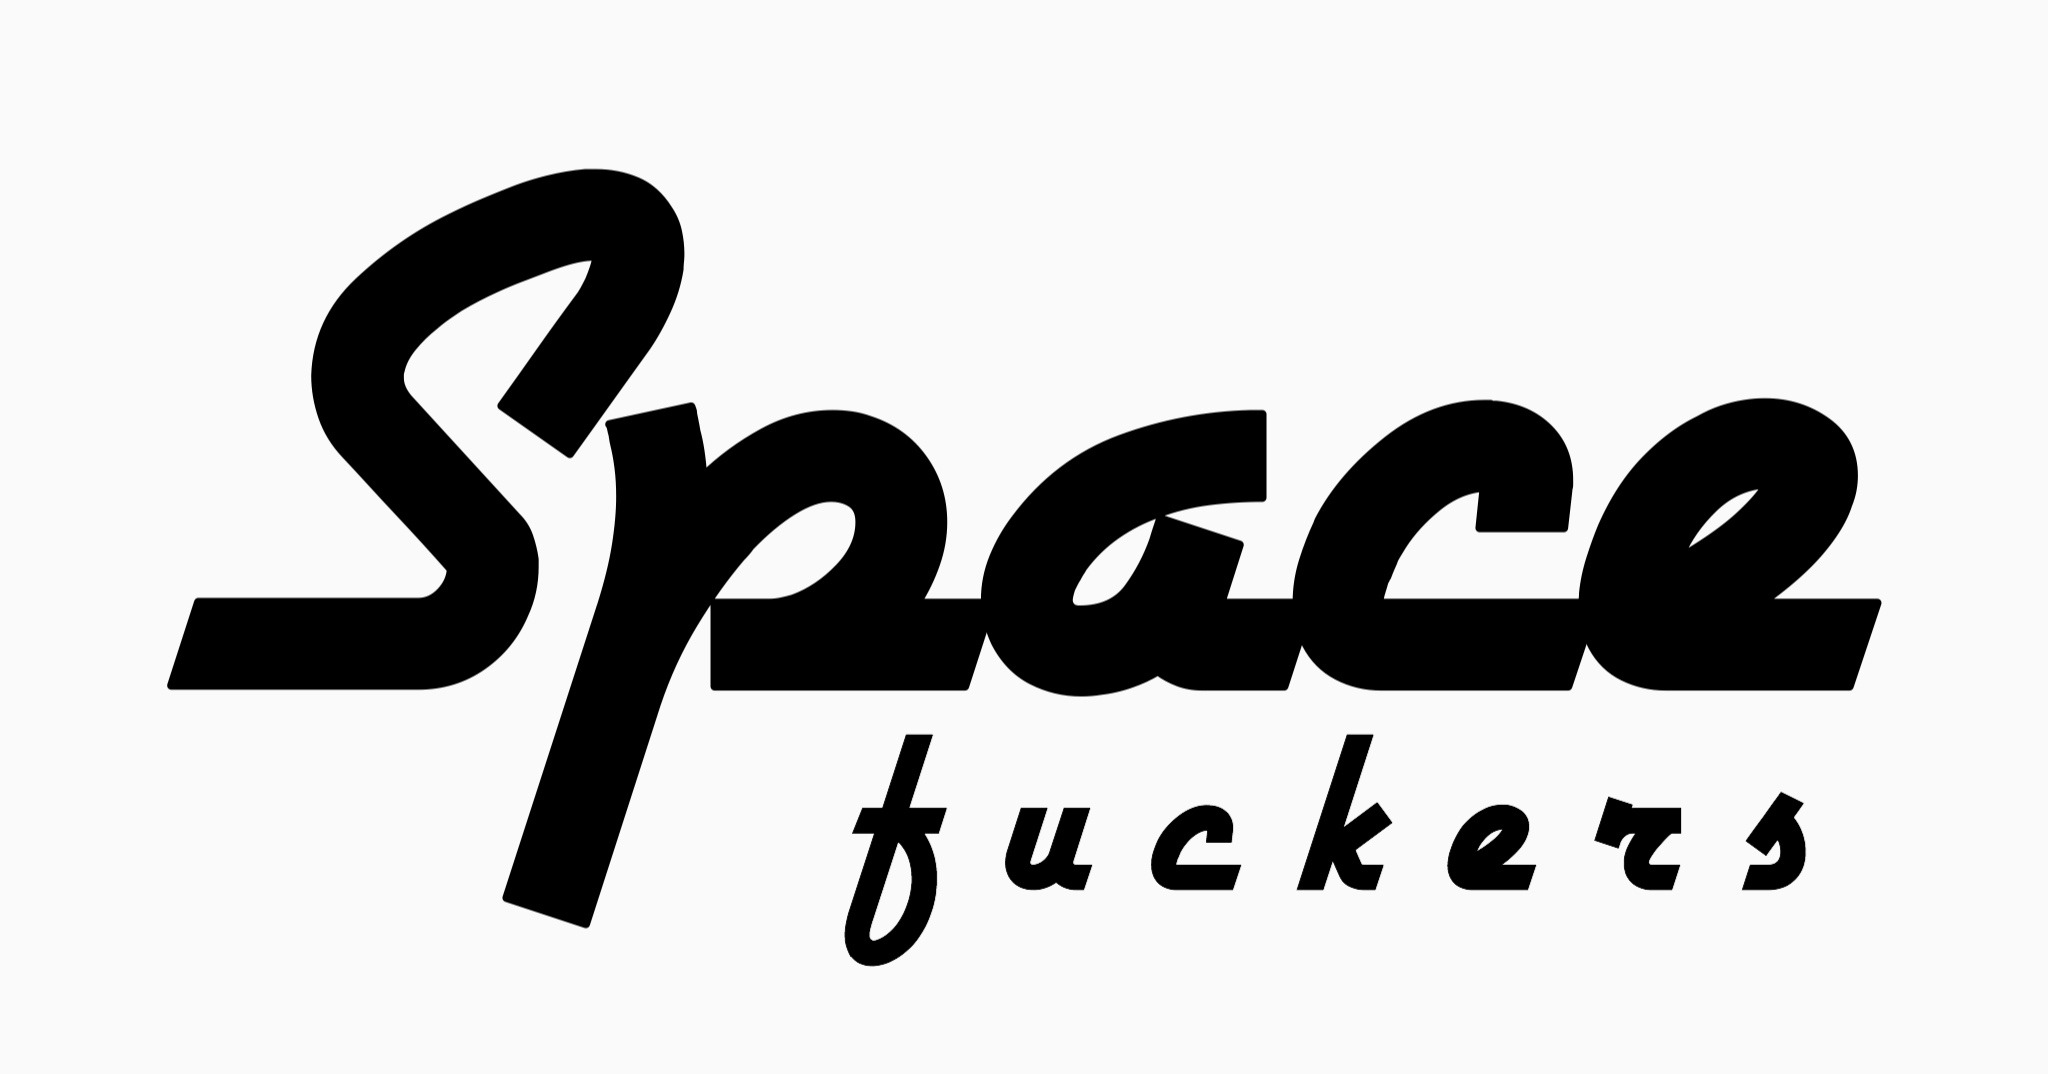 SPACE FUCKERS